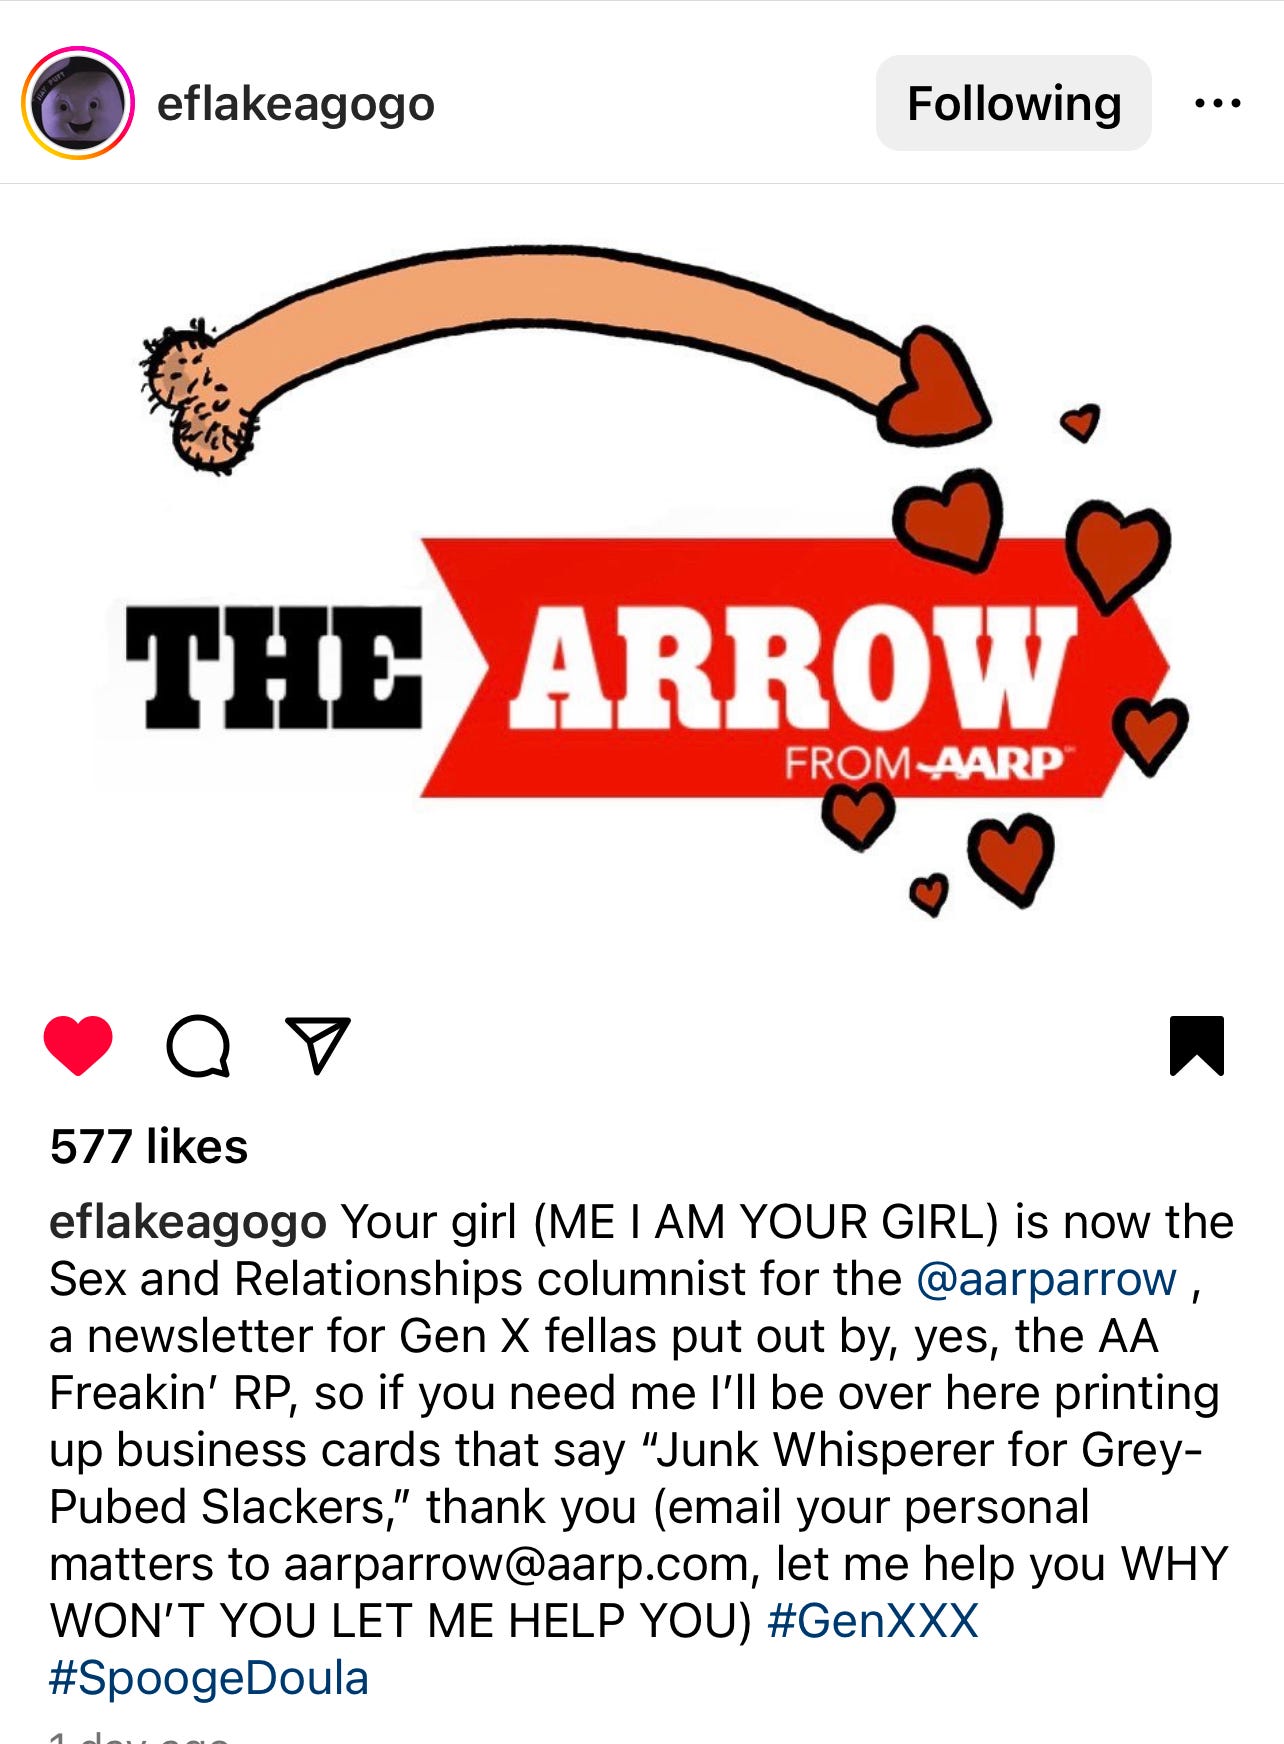 A logo for The Arrow from AARP with a curved penis drawn above it and the caption: Your girl (ME I AM YOUR GIRL) is now the Sex and Relationships columnist for the @aarparrow , a newsletter for Gen X fellas put out by, yes, the AA Freakin’ RP, so if you need me I’ll be over here printing up business cards that say “Junk Whisperer for Grey-Pubed Slackers,” thank you (email your personal matters to aarparrow@aarp.com, let me help you WHY WON’T YOU LET ME HELP YOU) #GenXXX #SpoogeDoula